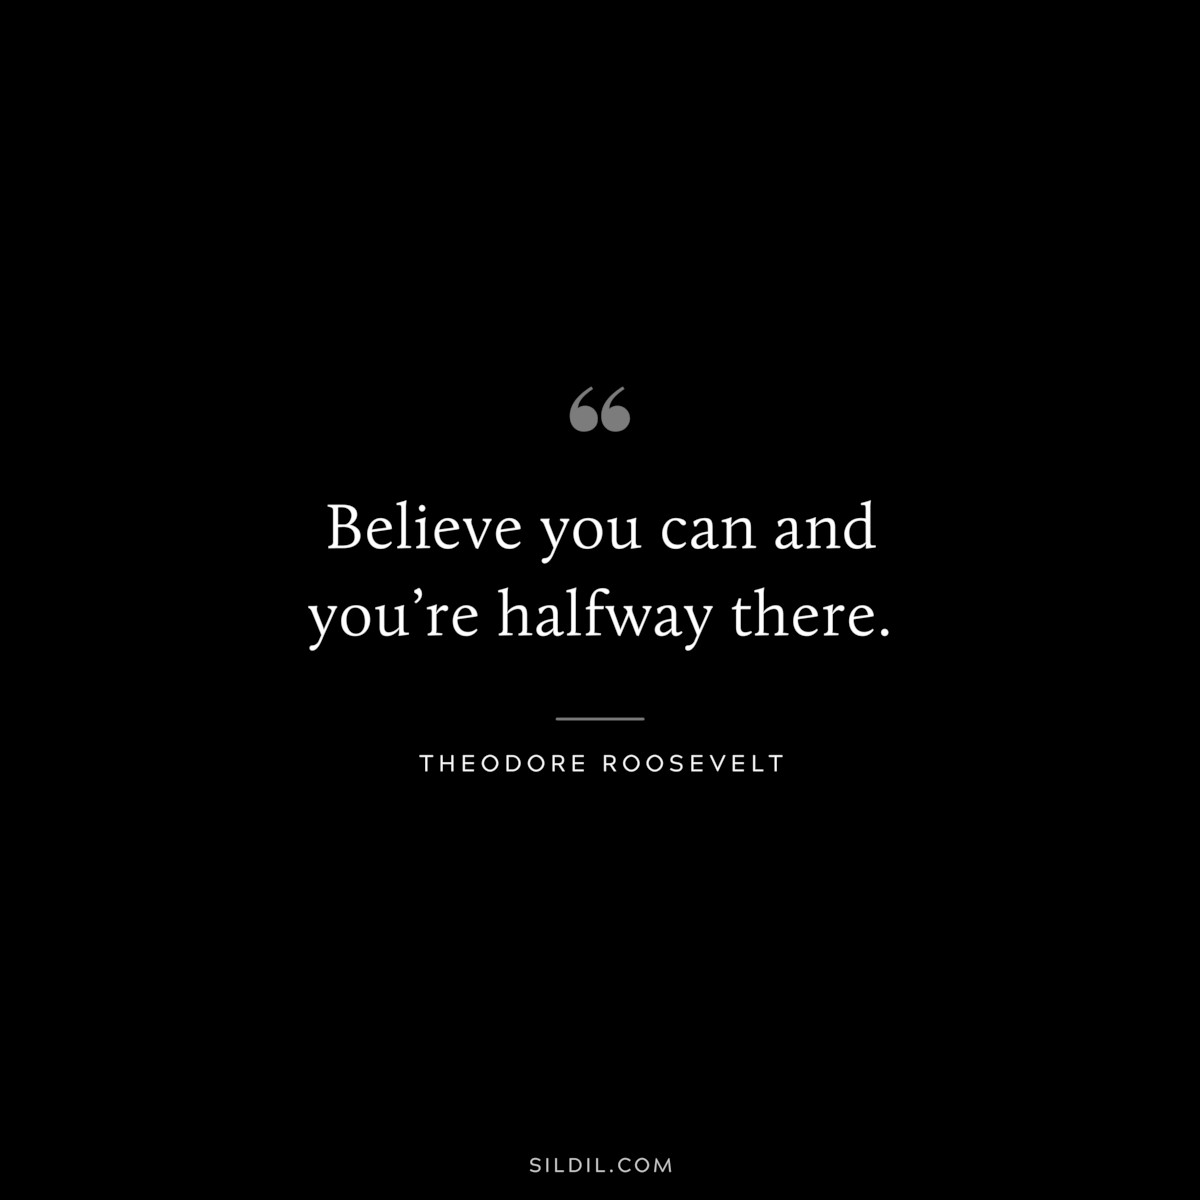 Believe you can and you’re halfway there. ― Theodore Roosevelt